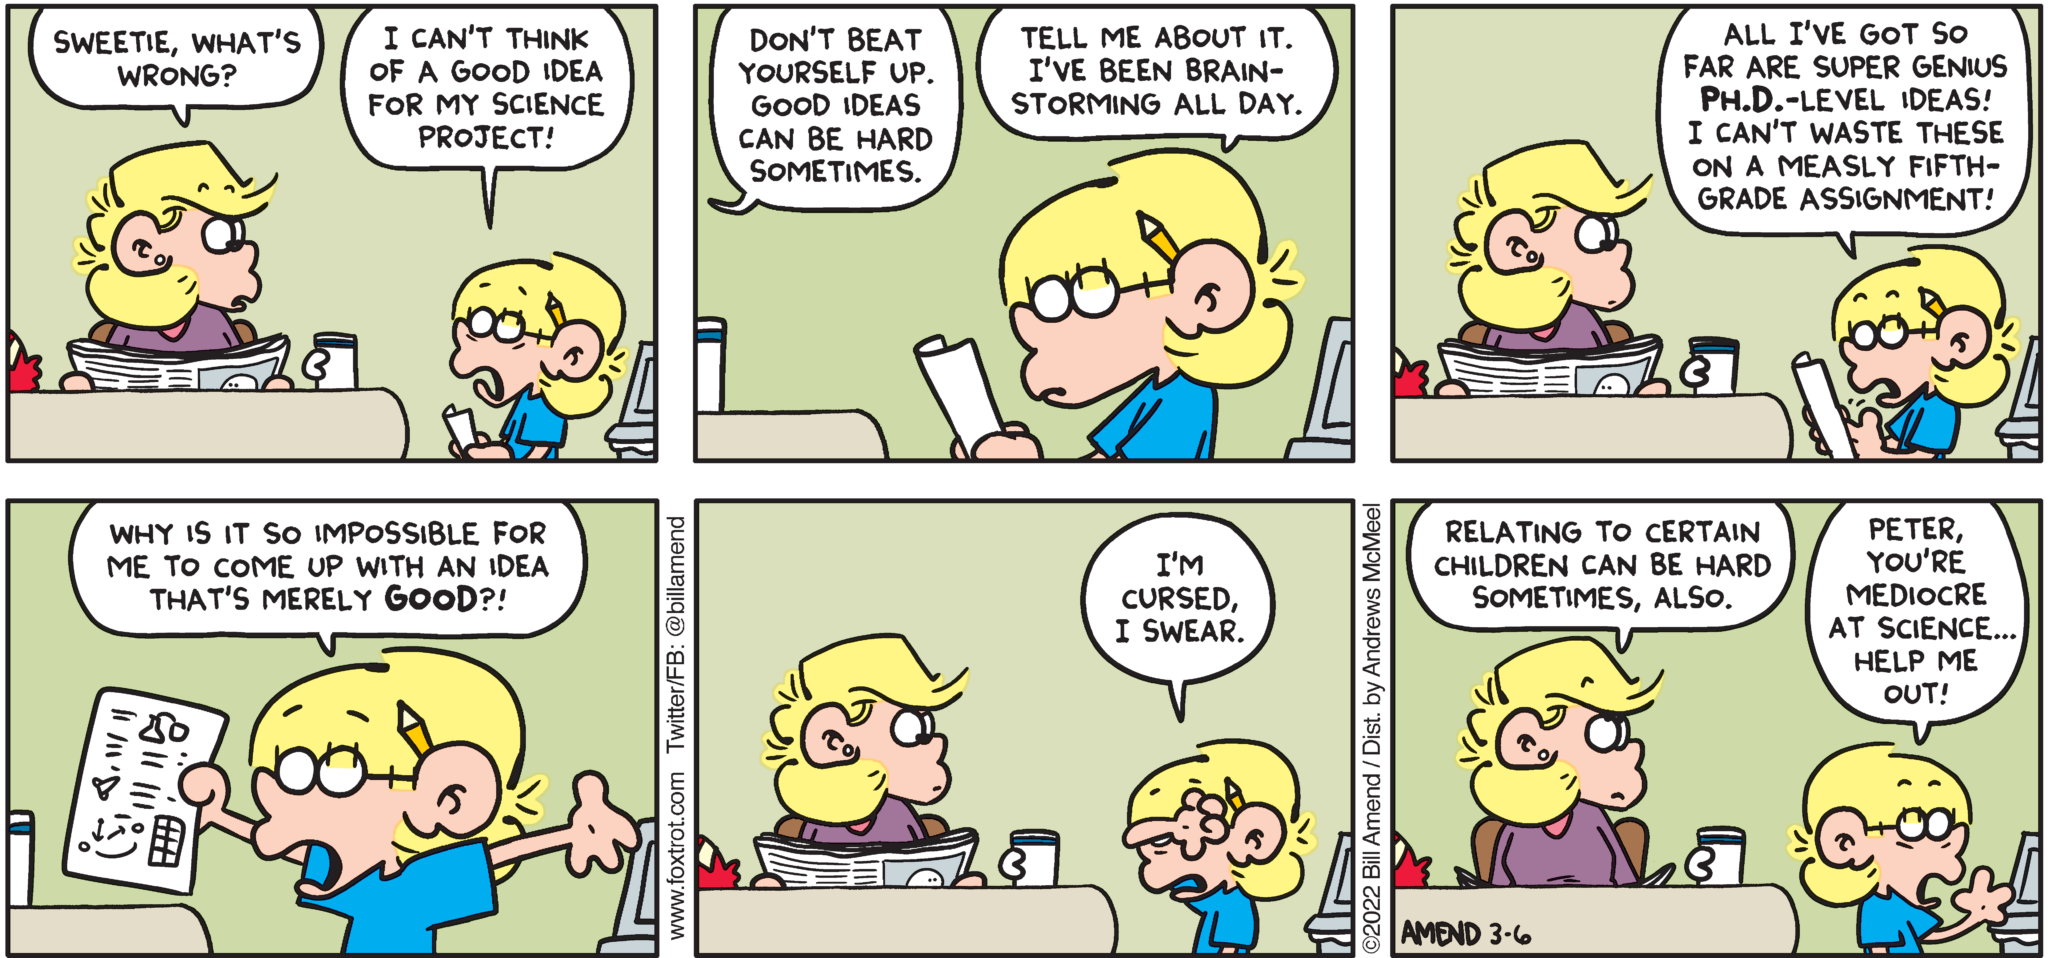 FoxTrot comic strip by Bill Amend - "Good Ideas" published March 6, 2022 - Transcript: Andy Fox: Sweetie, what's wrong? Jason Fox: I can't think of a good idea for my science project! Andy Fox: Don't beat yourself up. Good ideas can be hard sometimes. Jason Fox: Tell me about it. I've been brainstorming all day. All I've got so far are super genius Ph.D.-level ideas! I can't waste these on a measly fifth-grade assignment! Why is it so impossible for me to come up with an idea that's merely GOOD?! I cursed, I swear. Andy Fox: Relating to certain children can be so hard sometimes, also. Jason Fox: Peter, you're mediocre at science... help me out!